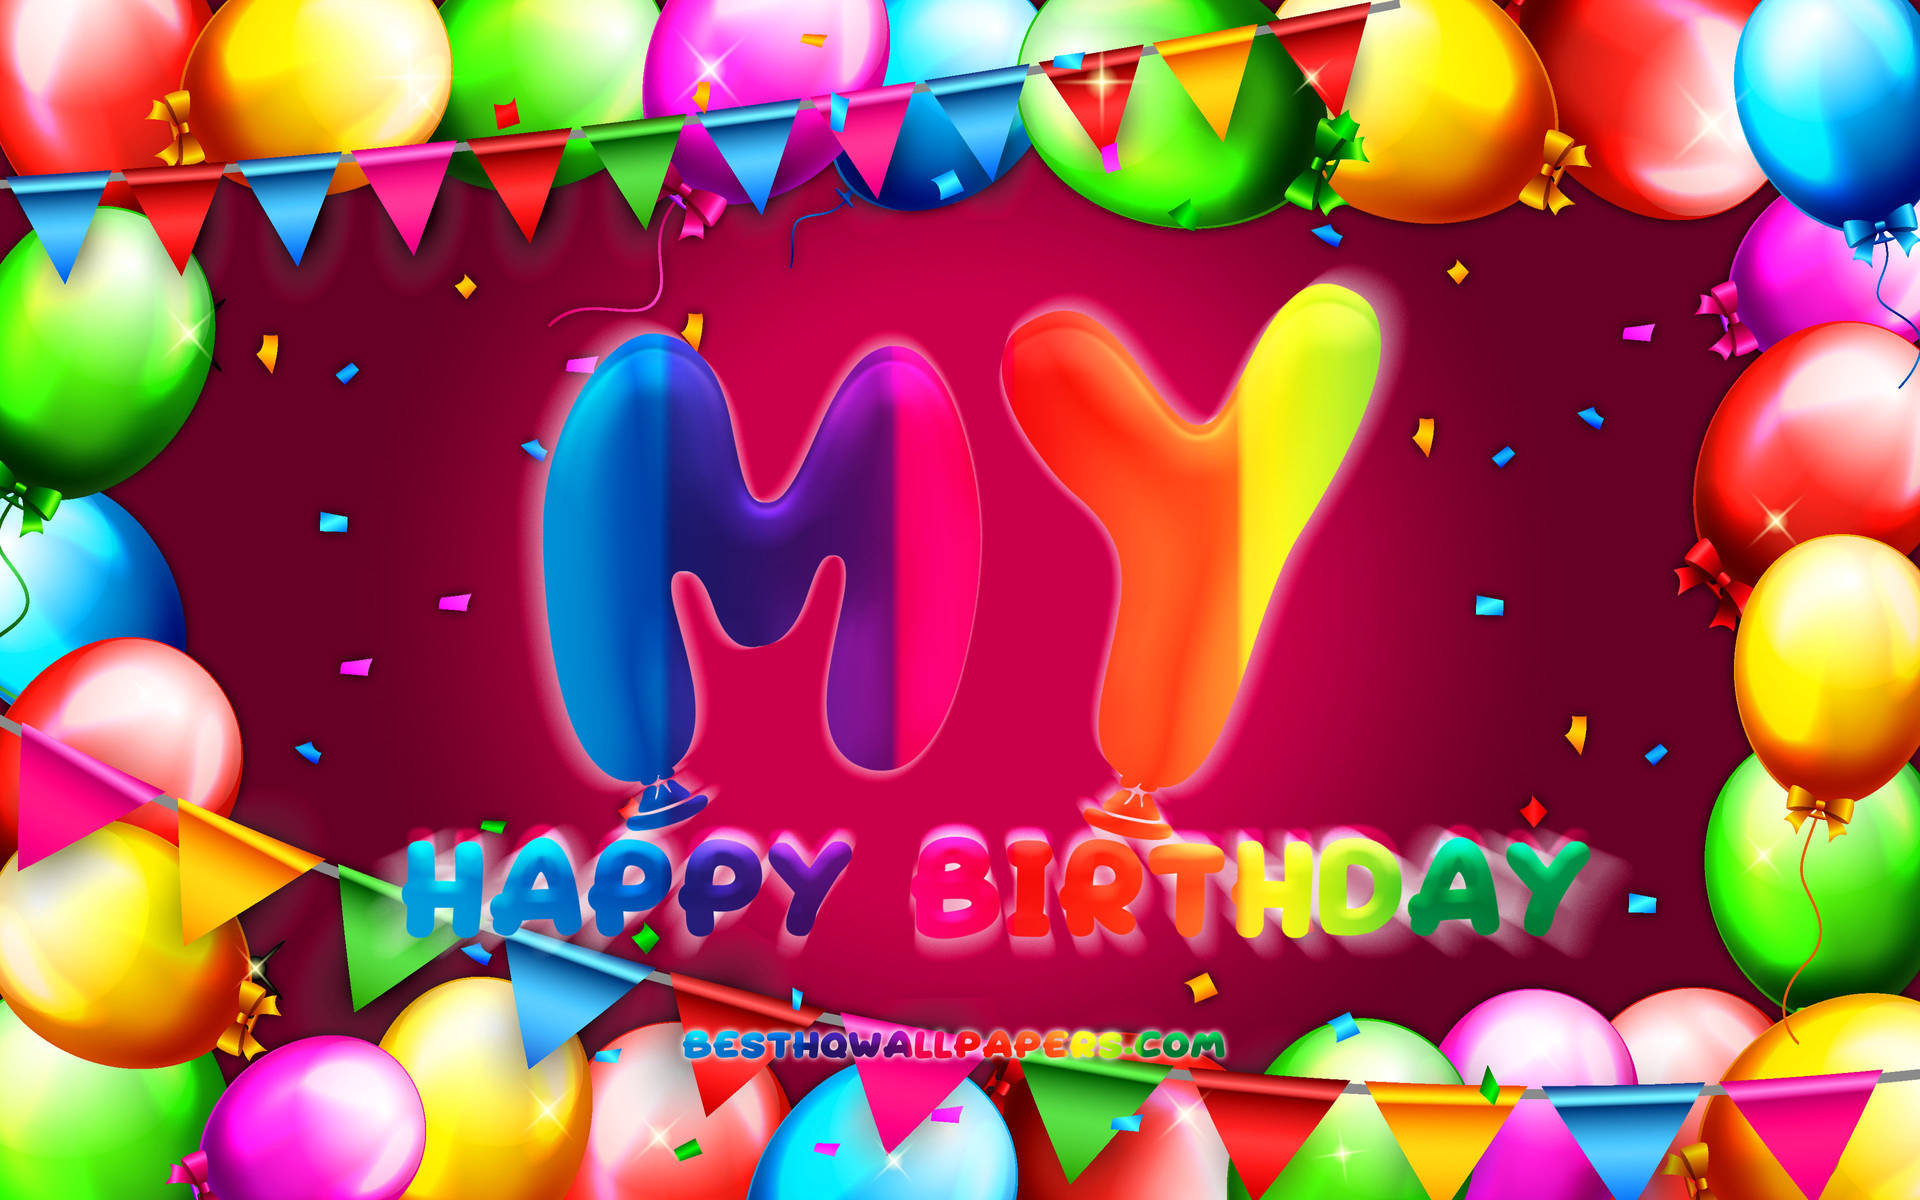 Colorful Balloons And Banners For My Birthday Wallpaper